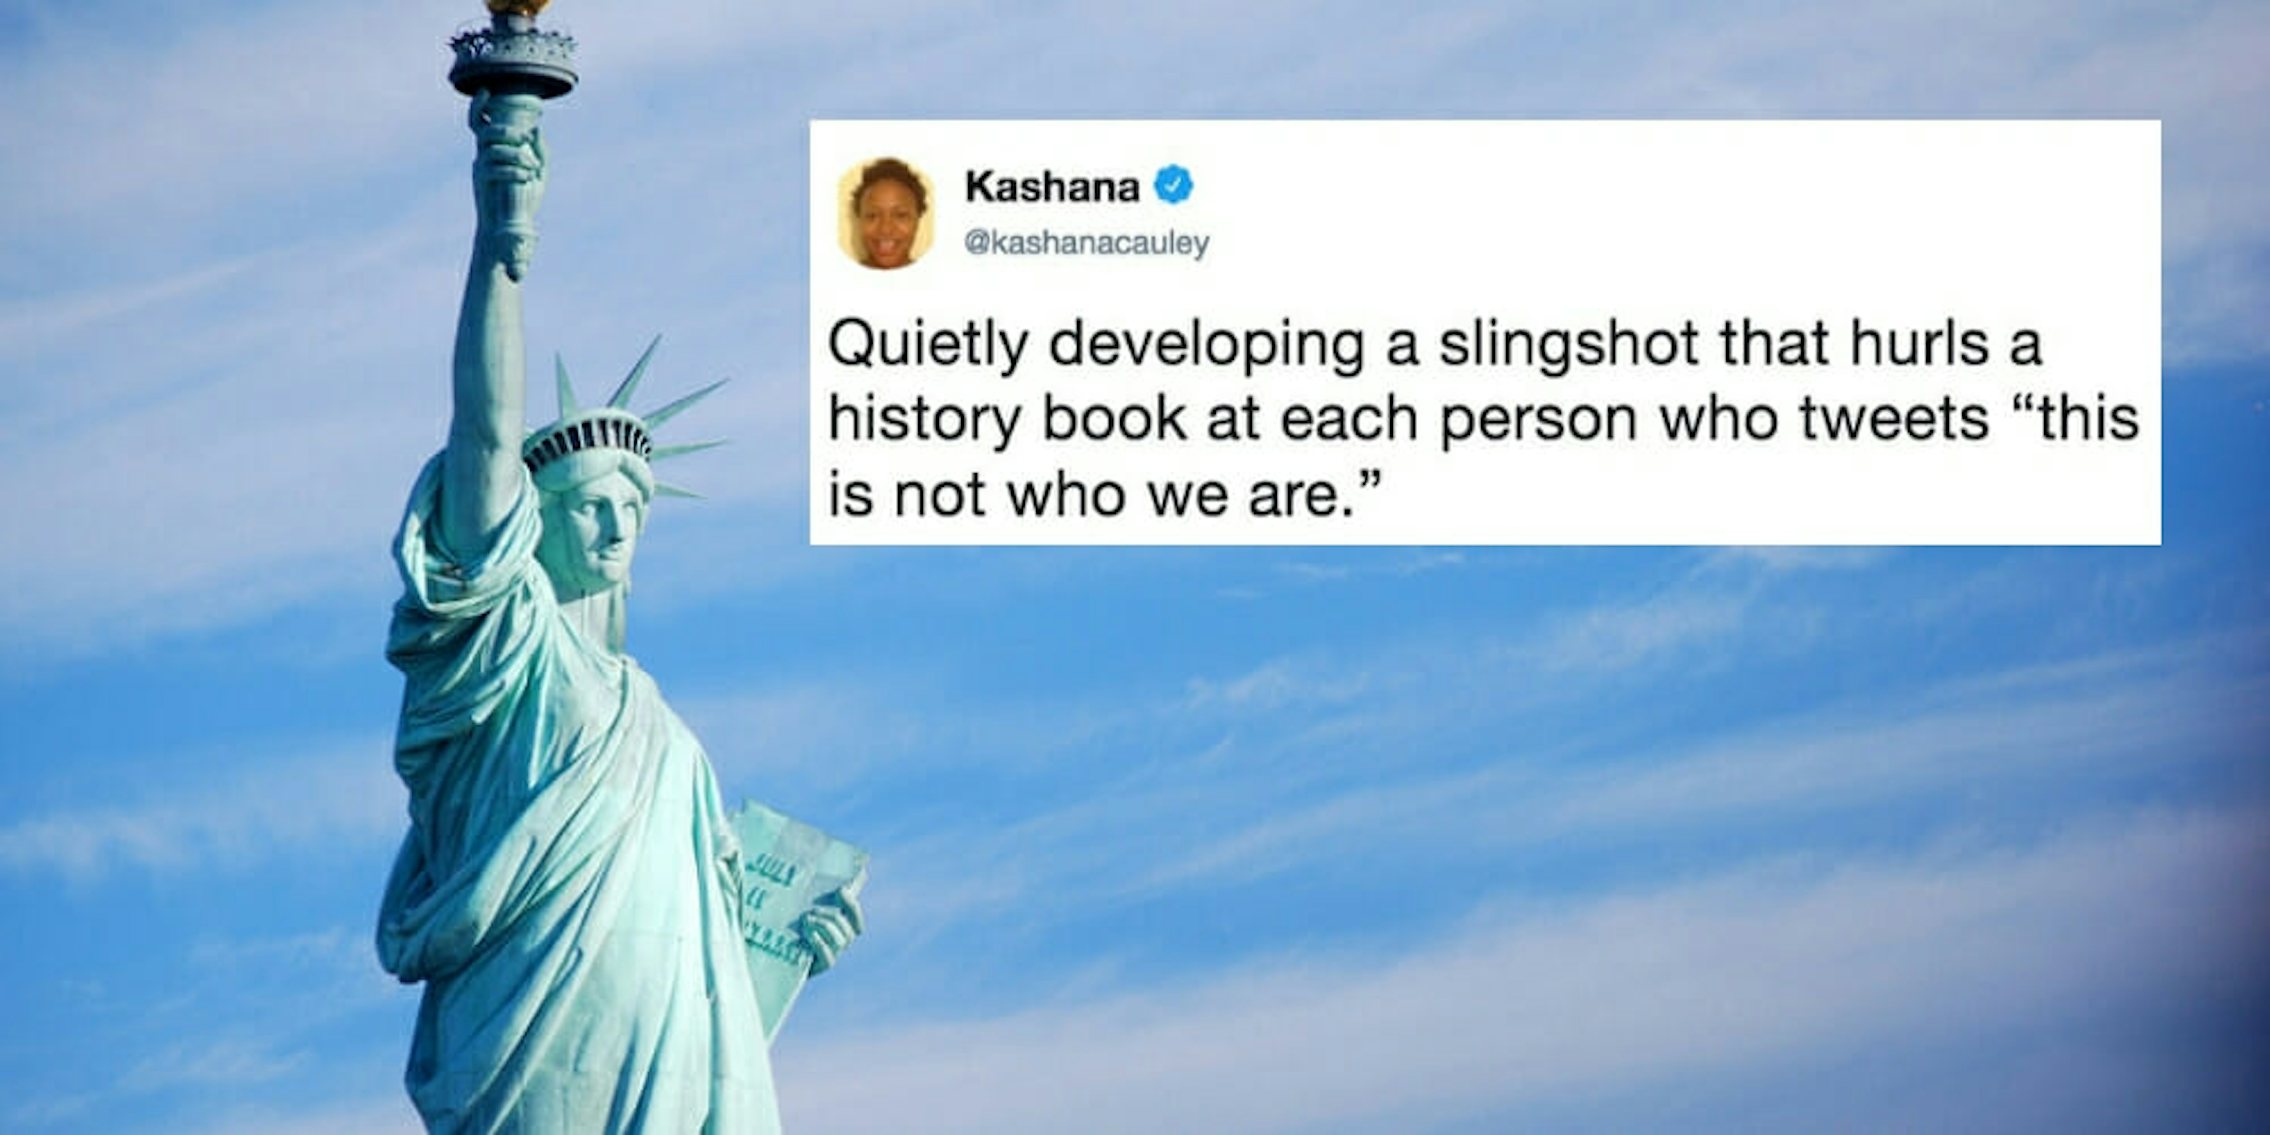 The Statue of Liberty with a 'This is not who we are' meme